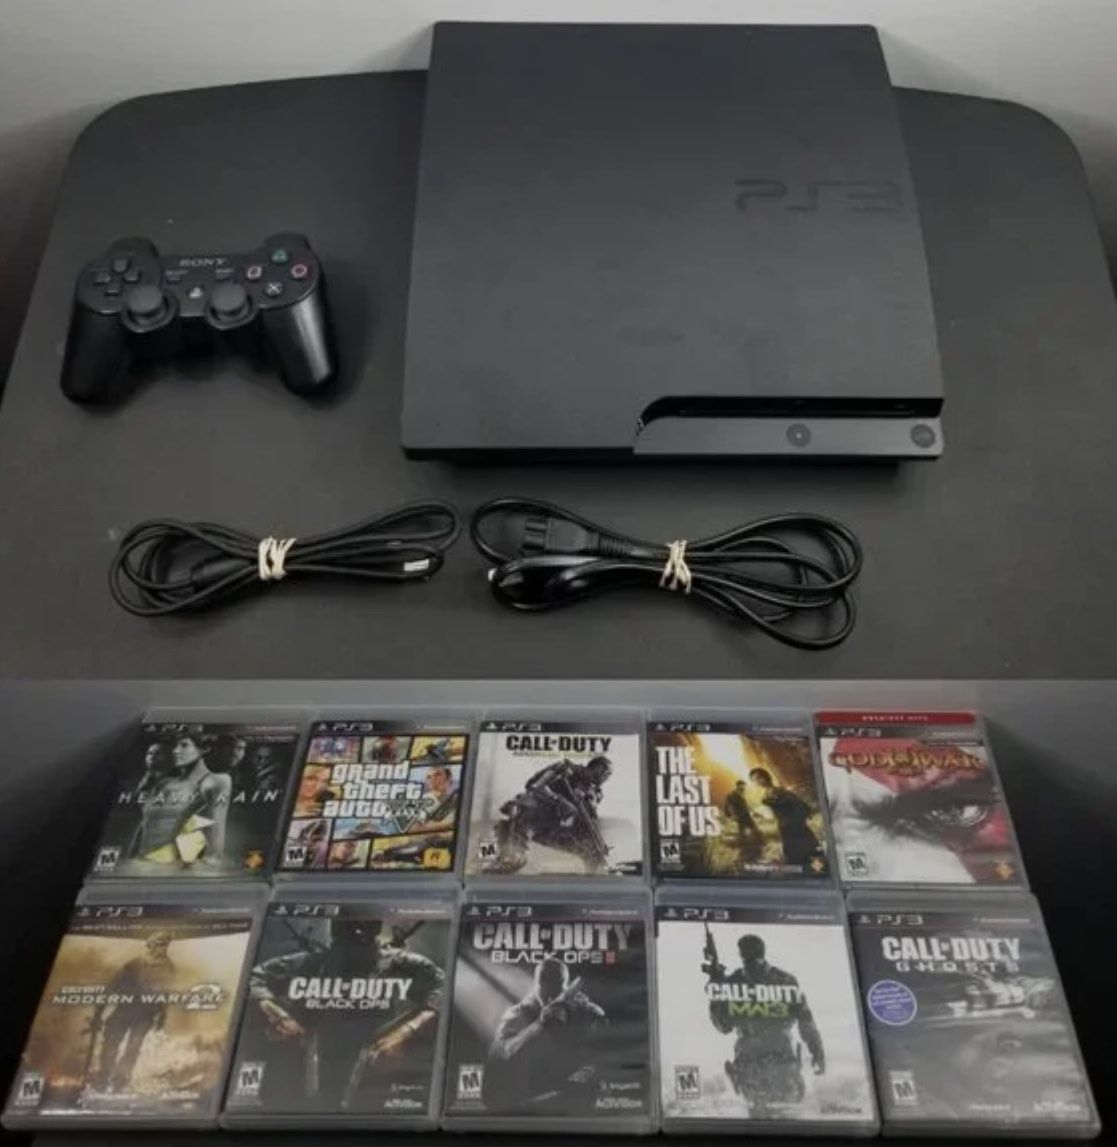 PlayStation 3 PS3 Slim 160GB Console System Bundle w/ Controller & Cords TESTED